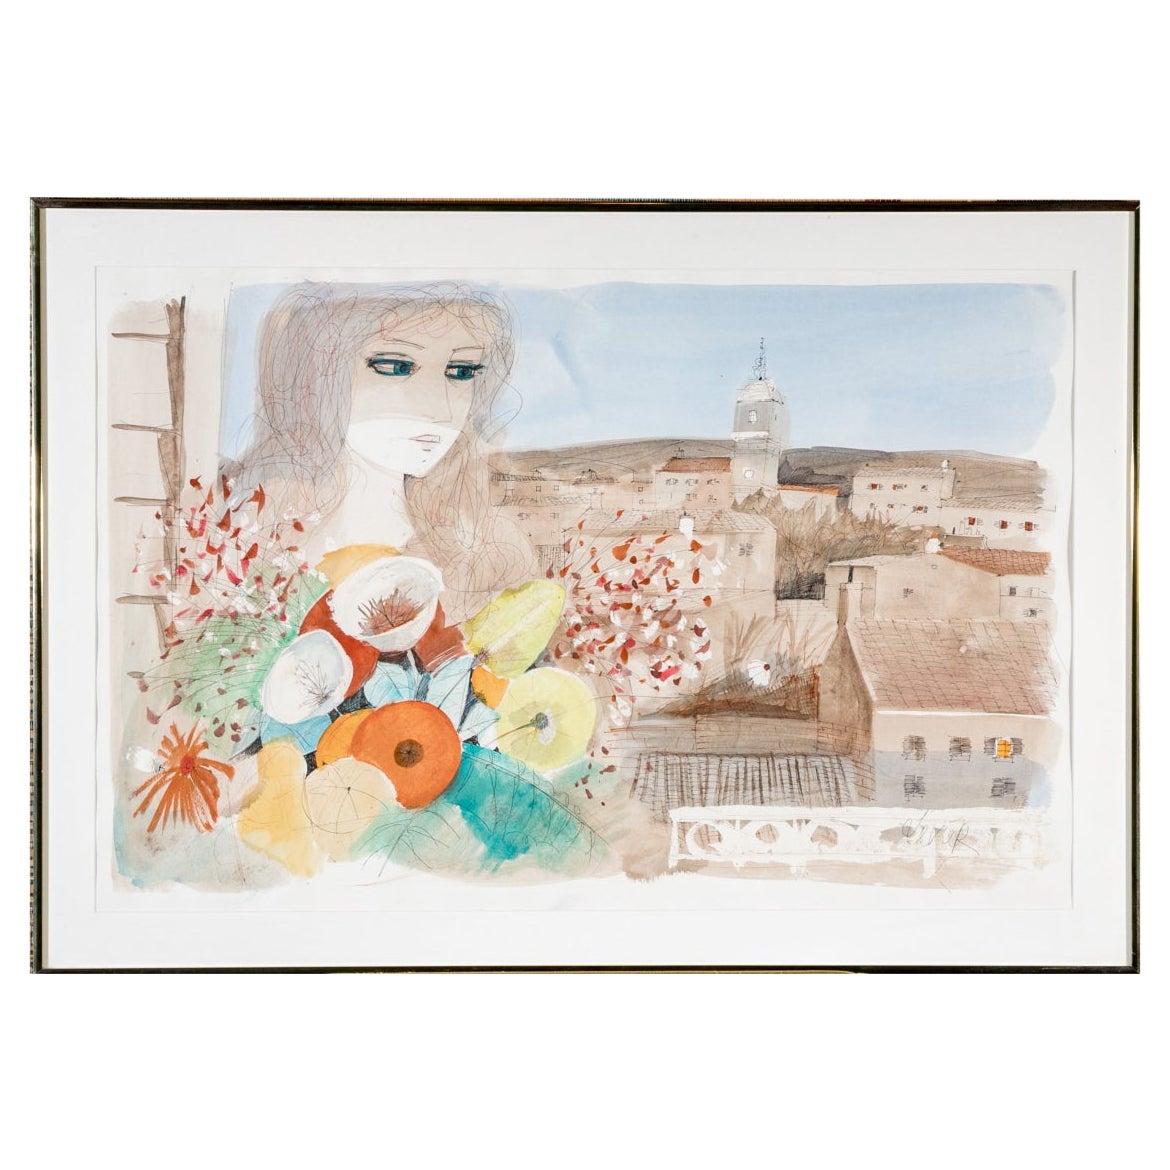 Charles Levier (French, 1920 - 2003) Large Watercolor & Ink Girl With Flowers For Sale